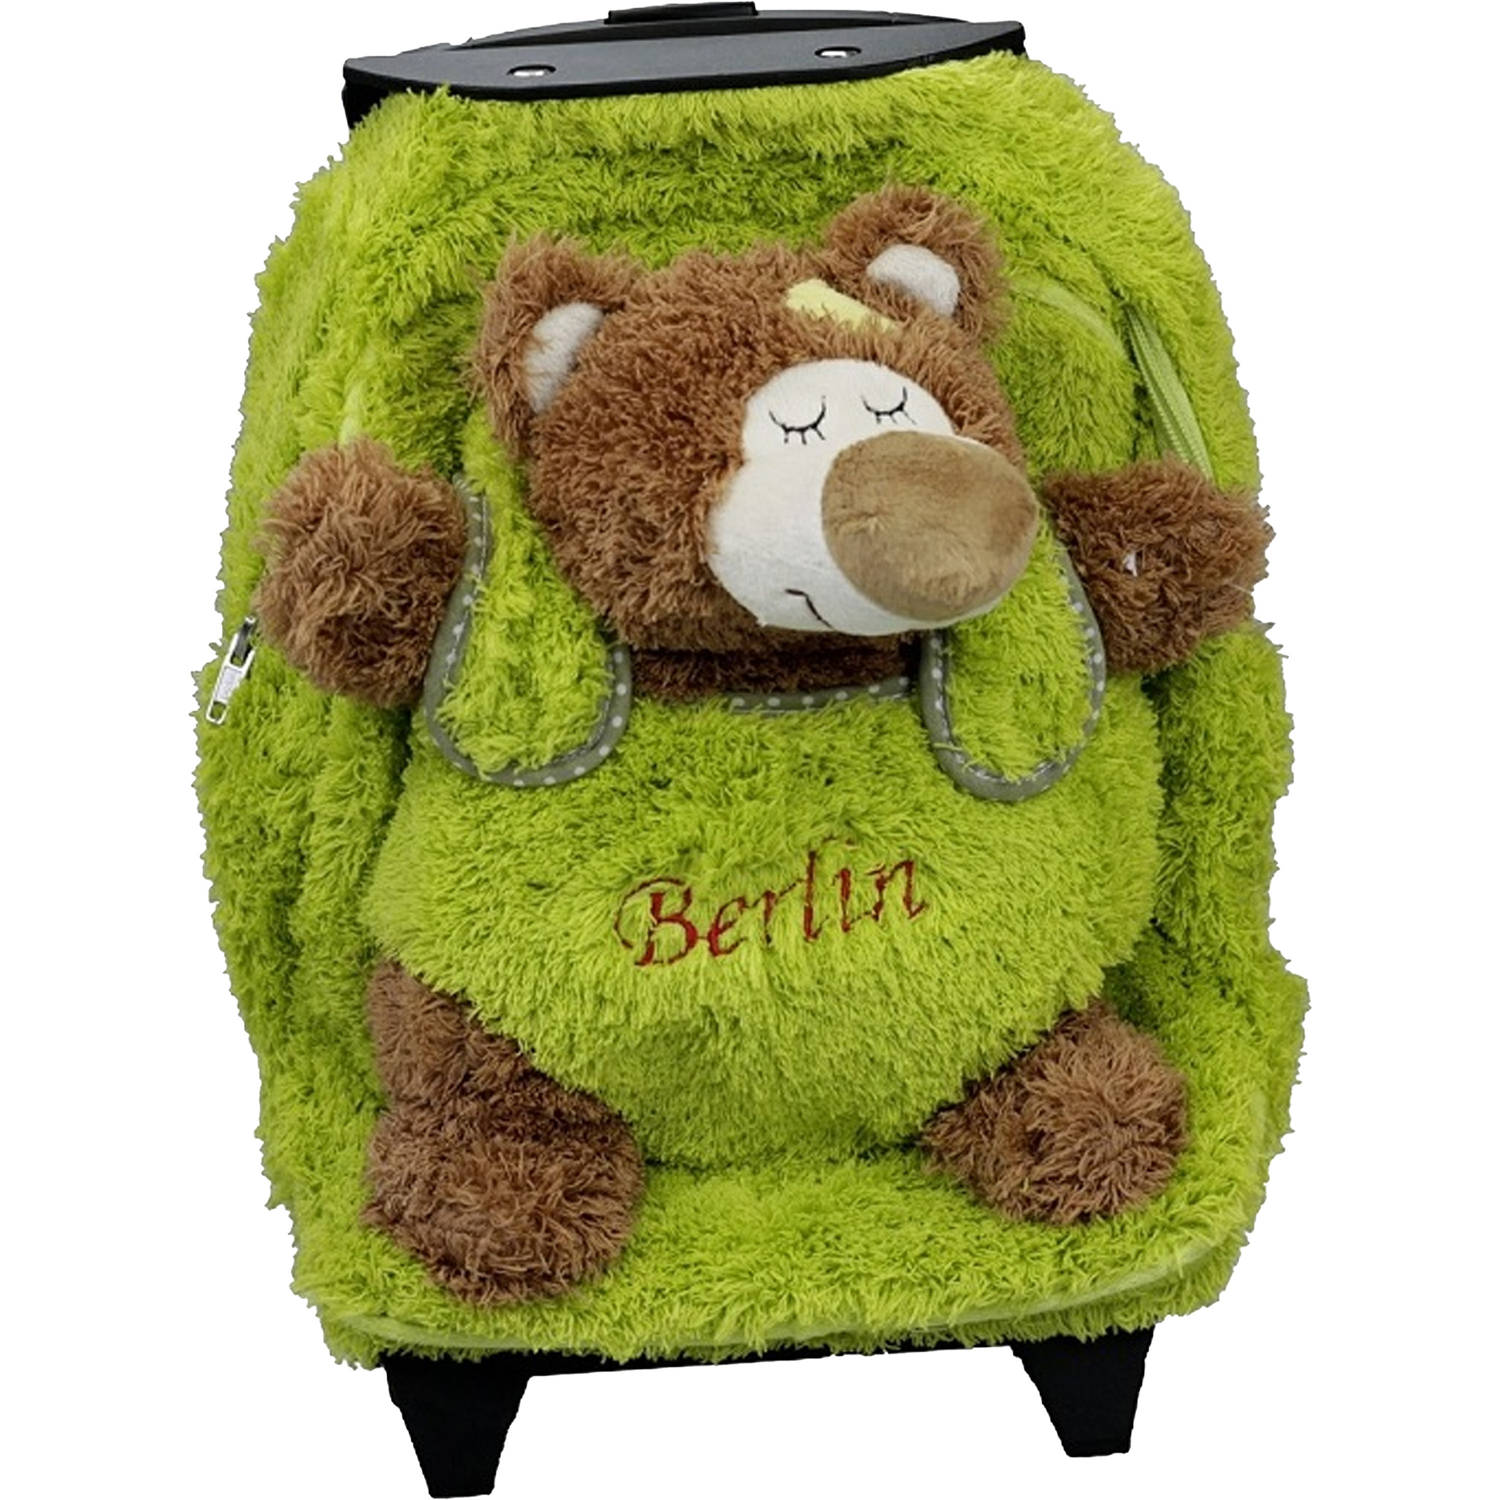 Inware Rugzaktrolley kinderkoffer - pluche beer knuffel - kunststof/polyester - 35 x 25 x 13 cm